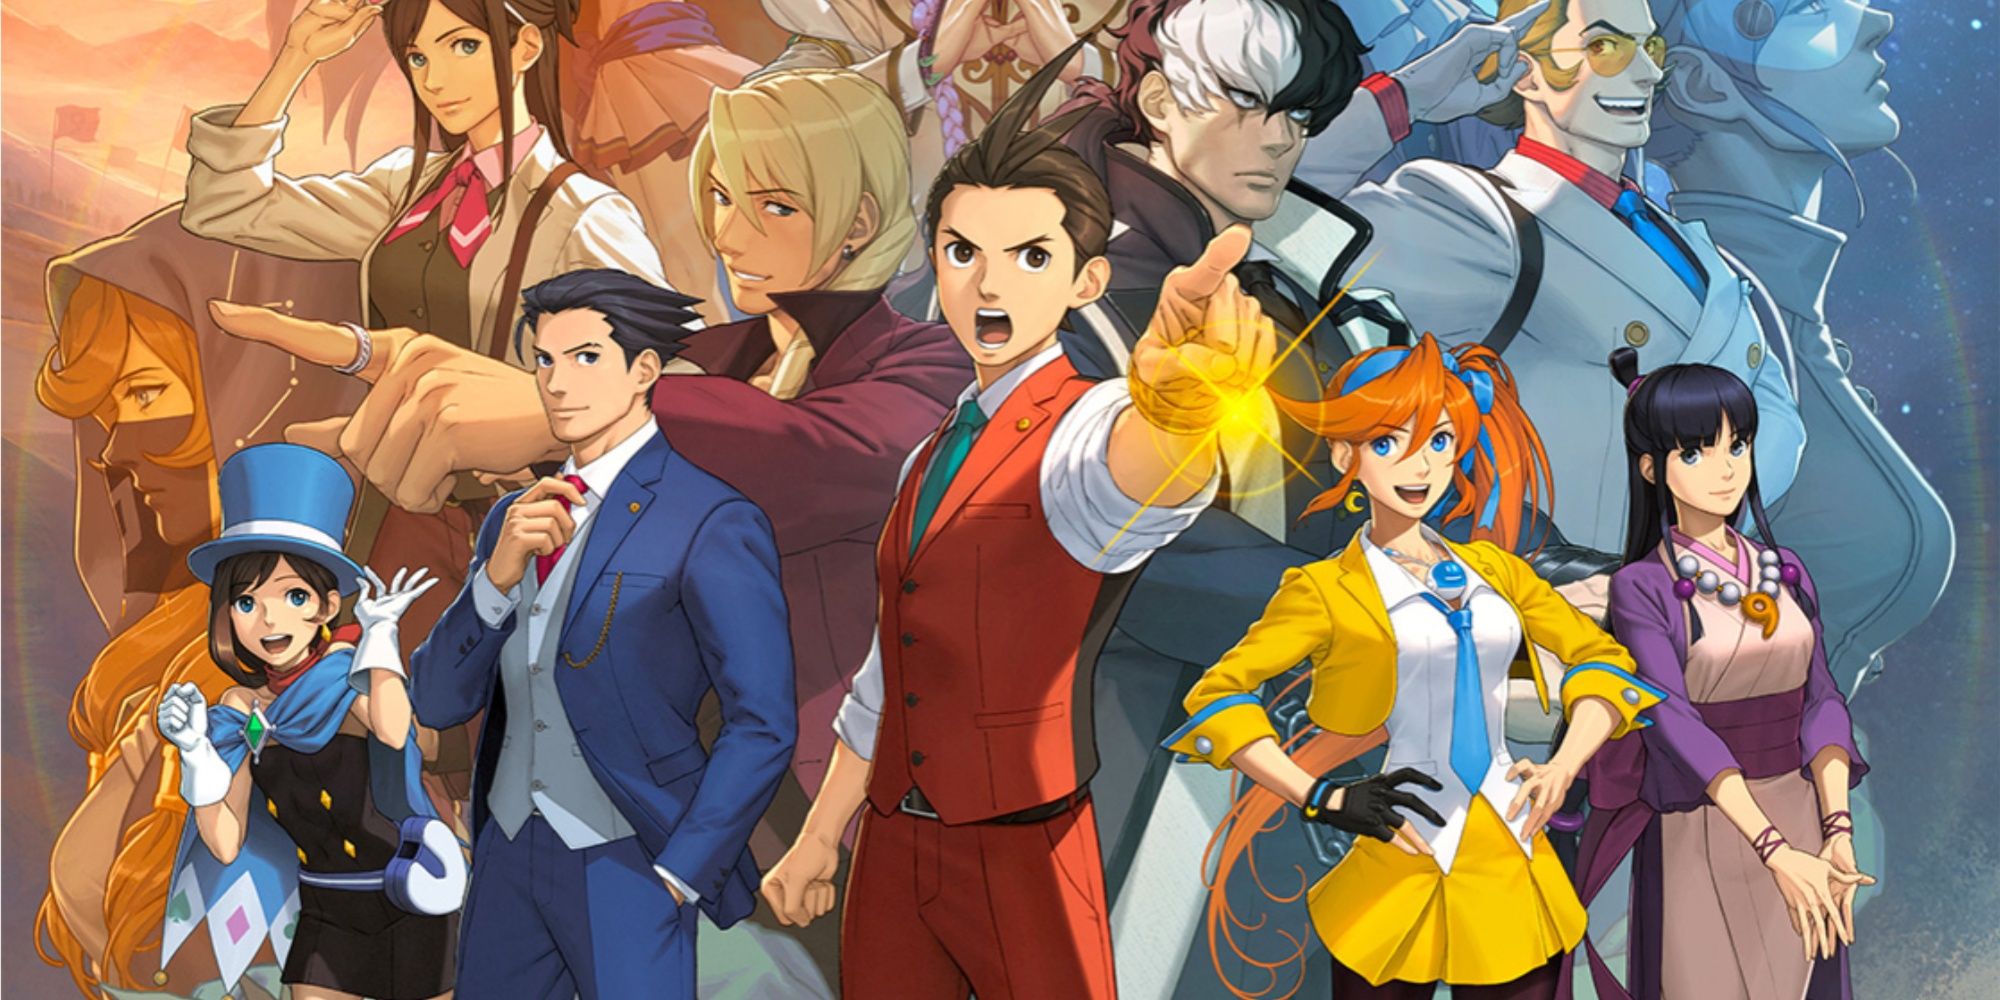 characters from the Apollo Justice: Ace Attorney Trilogy